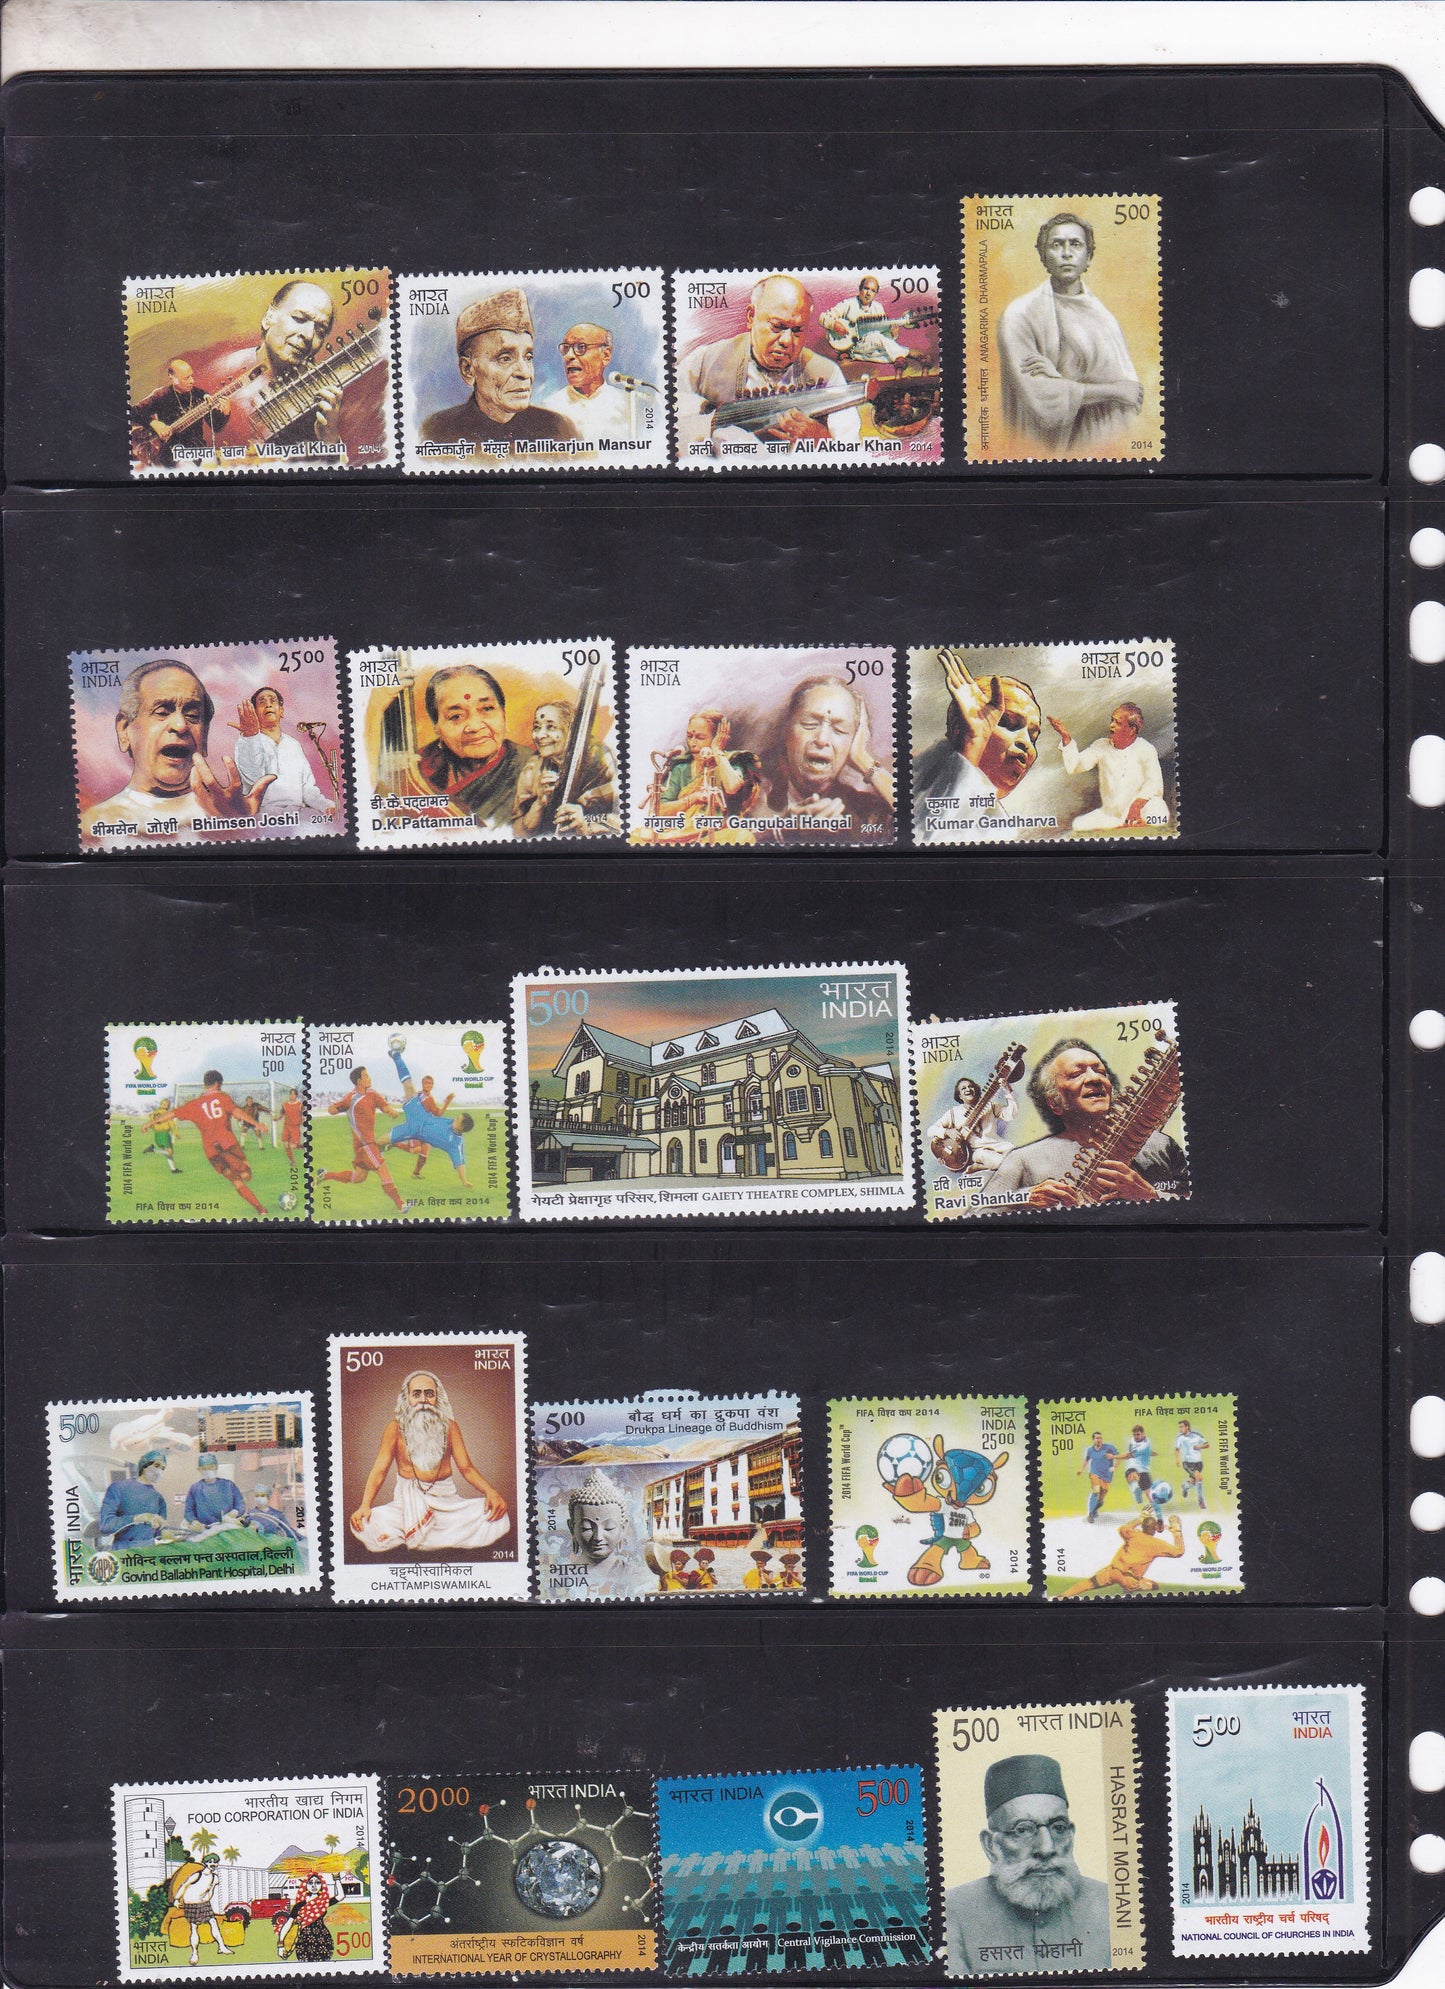 India-2014 Full Year pack MNH Stamps.